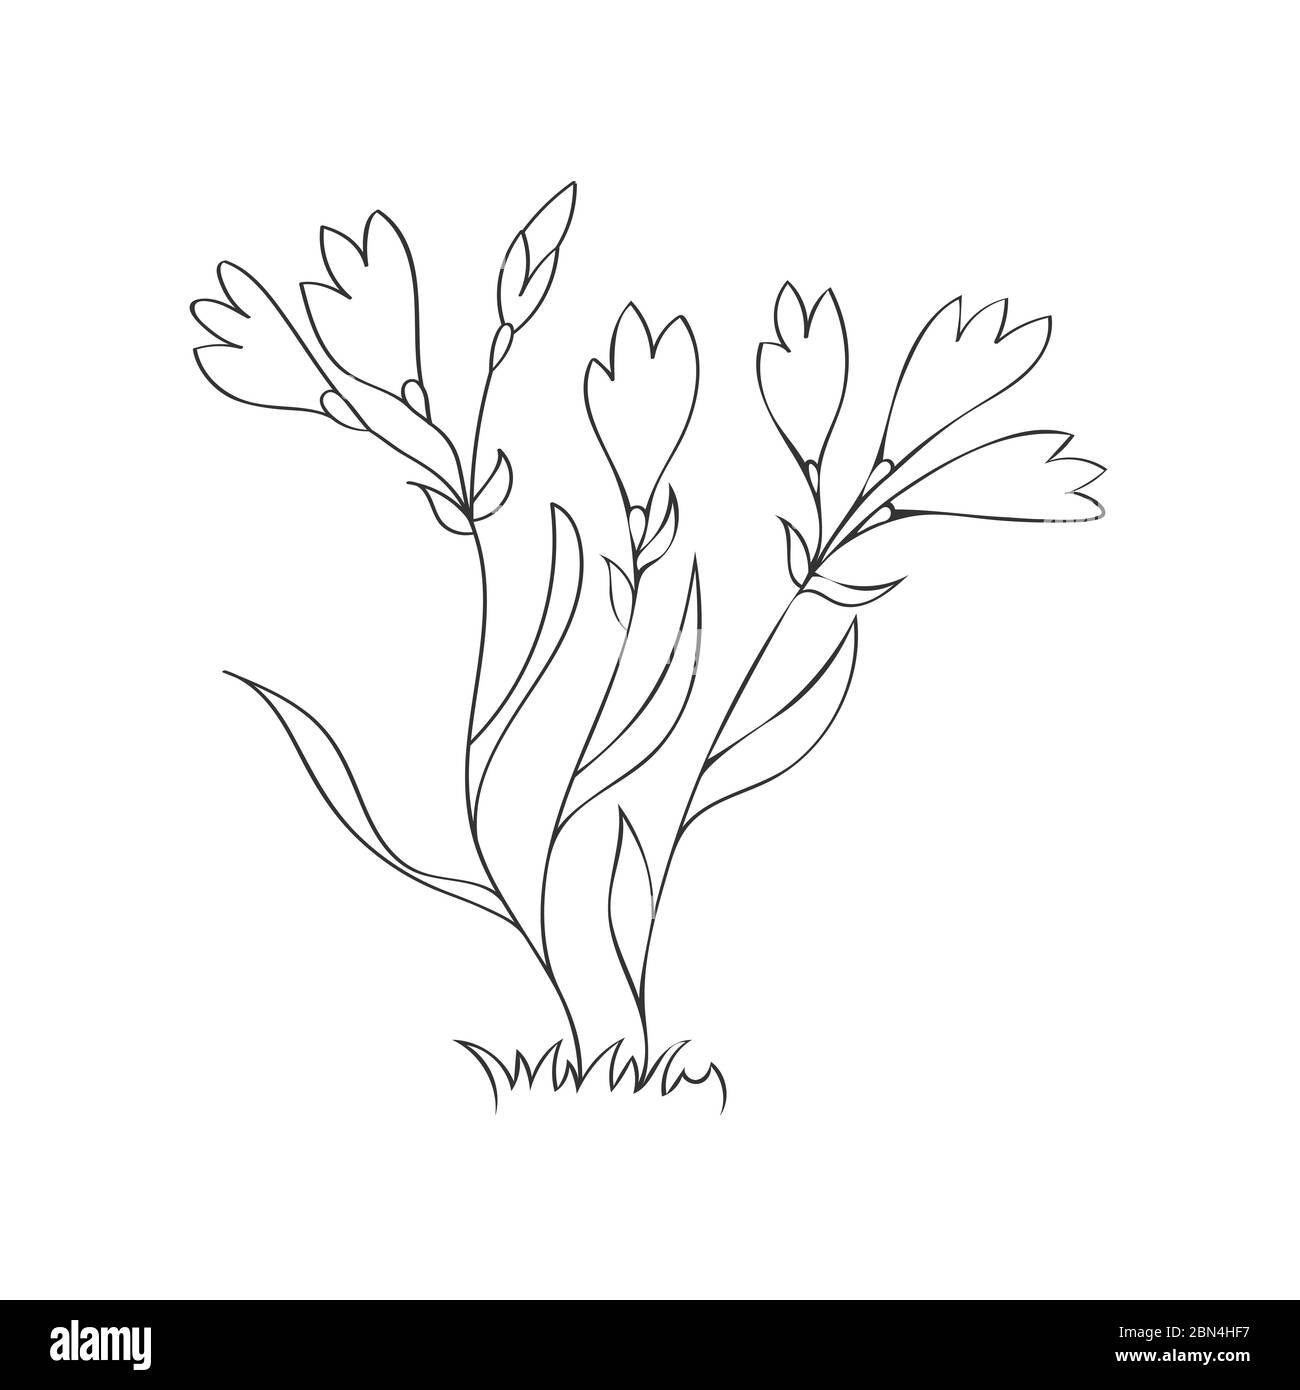 Vector illustration of a flower. Stock illustration isolated on a white background linear design for thematic drawings and scrapbooking Stock Vector